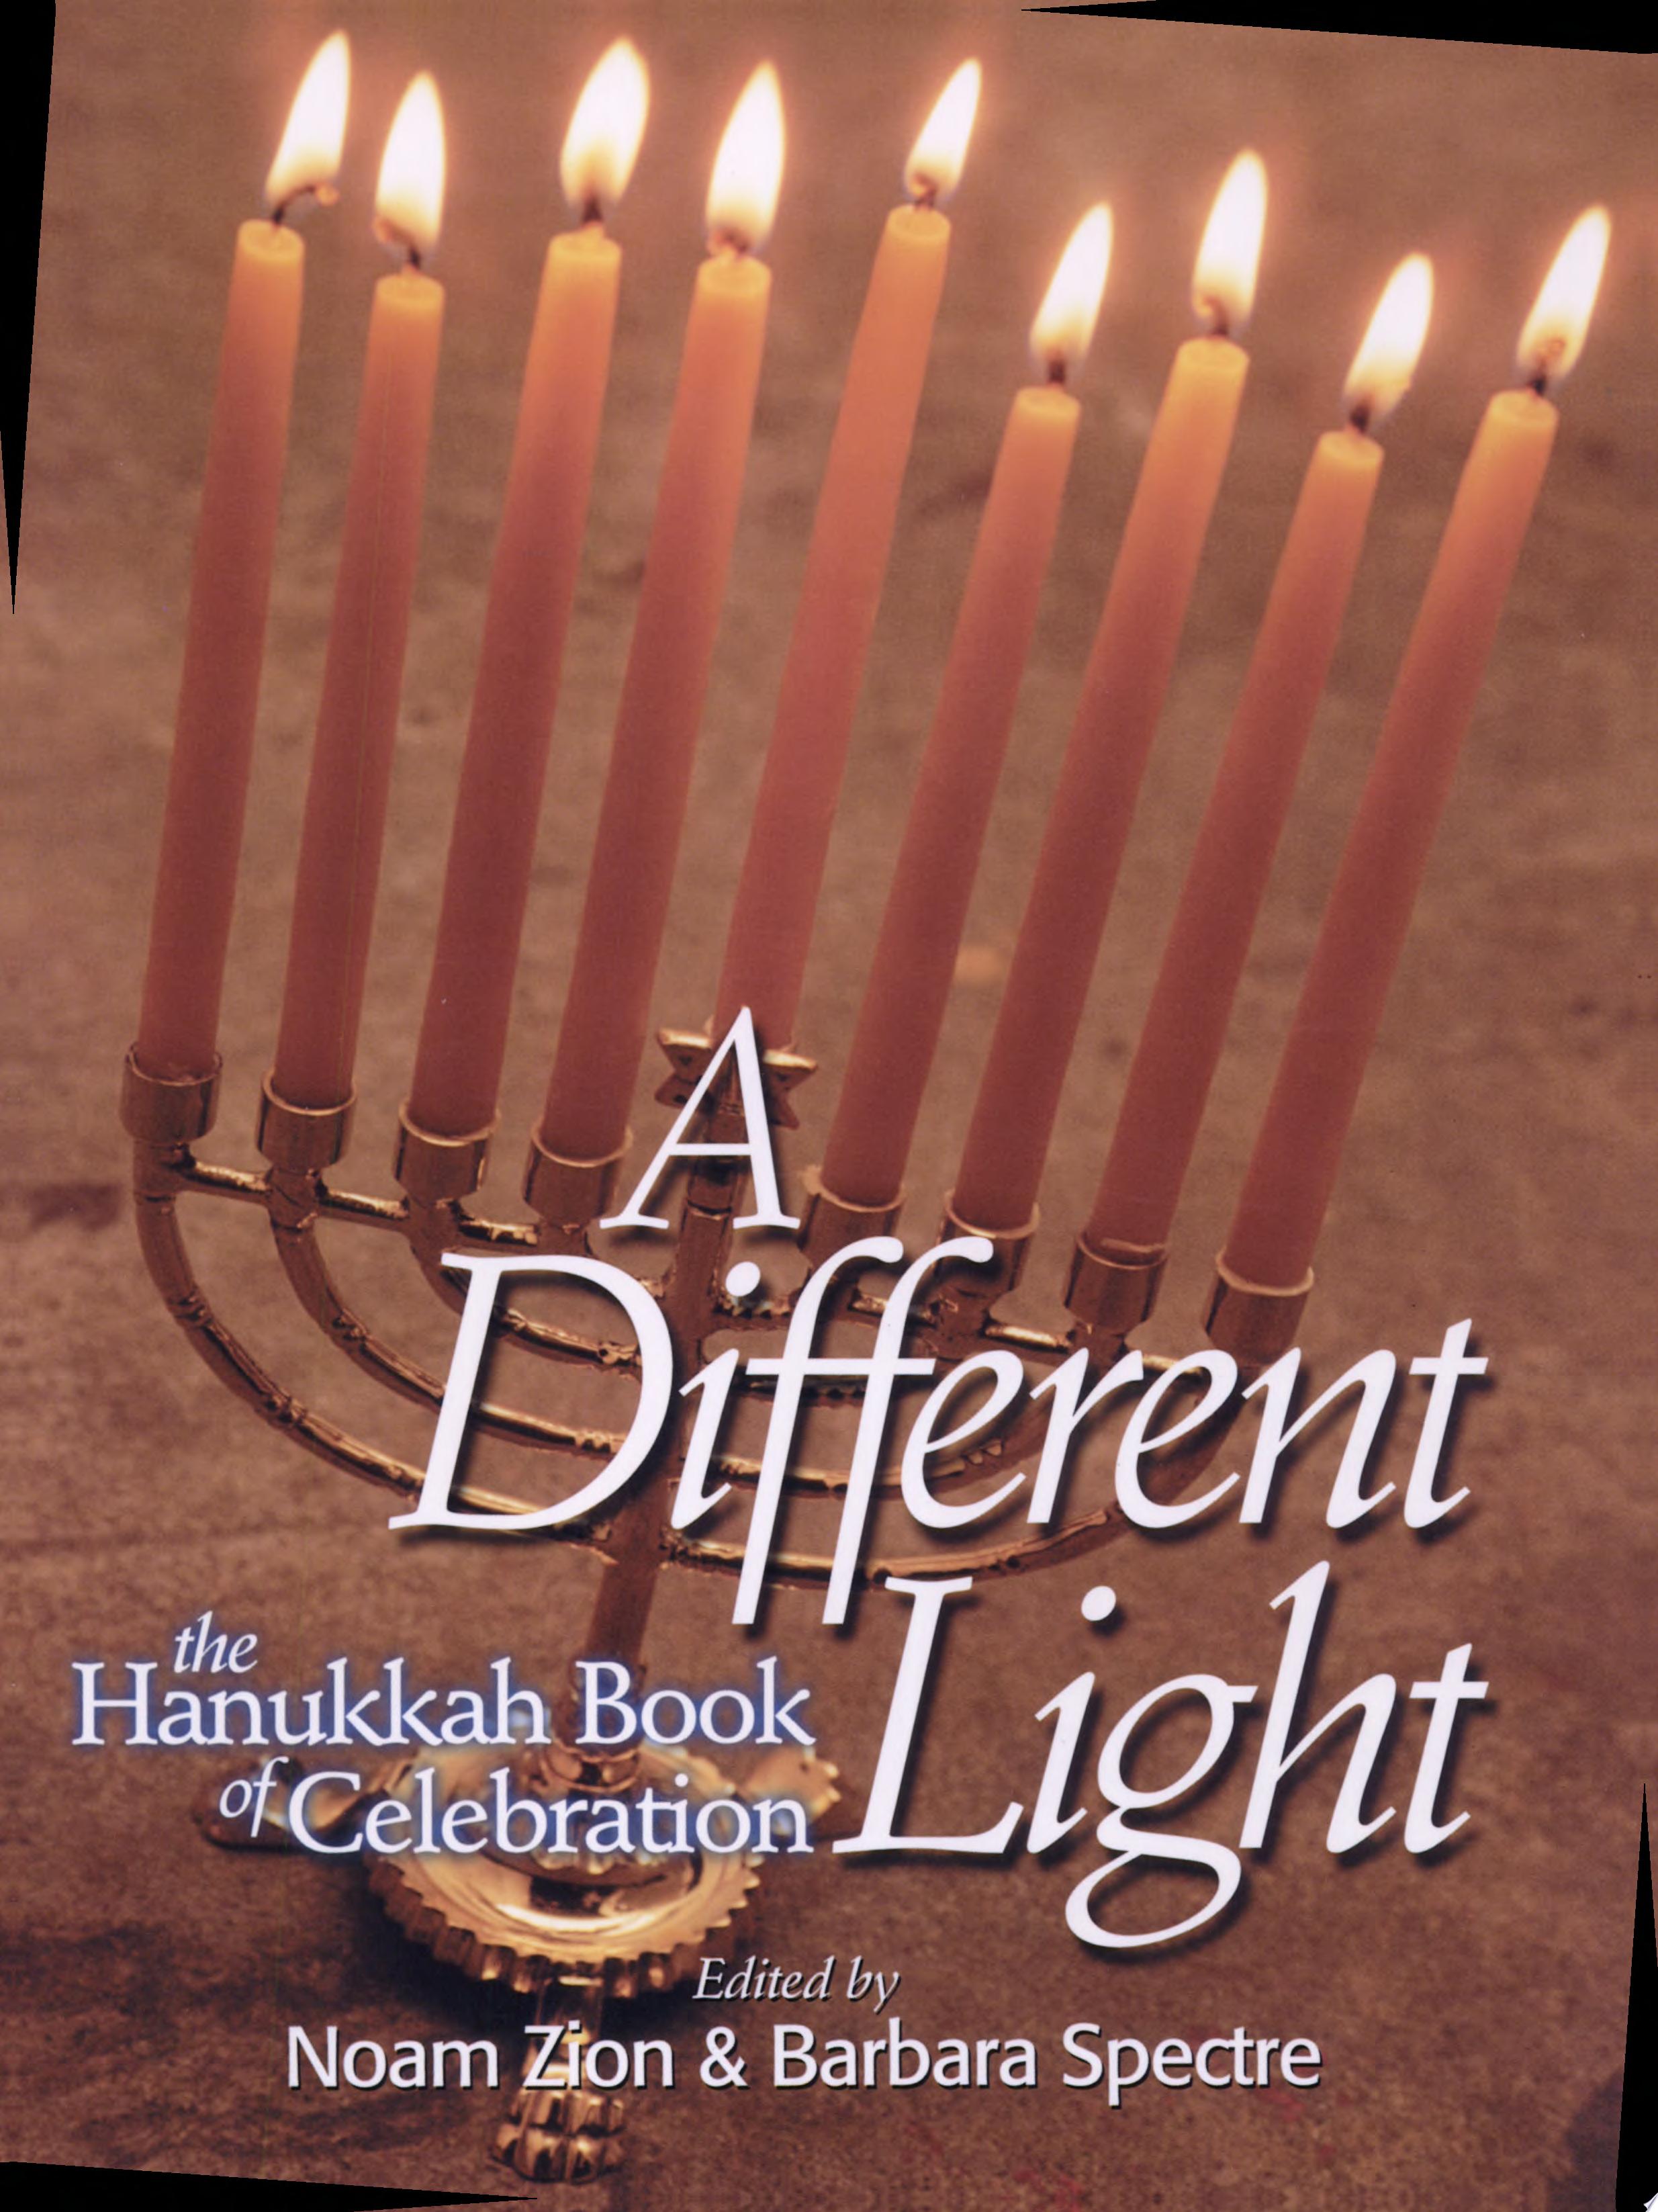 Image for "A Different Light"